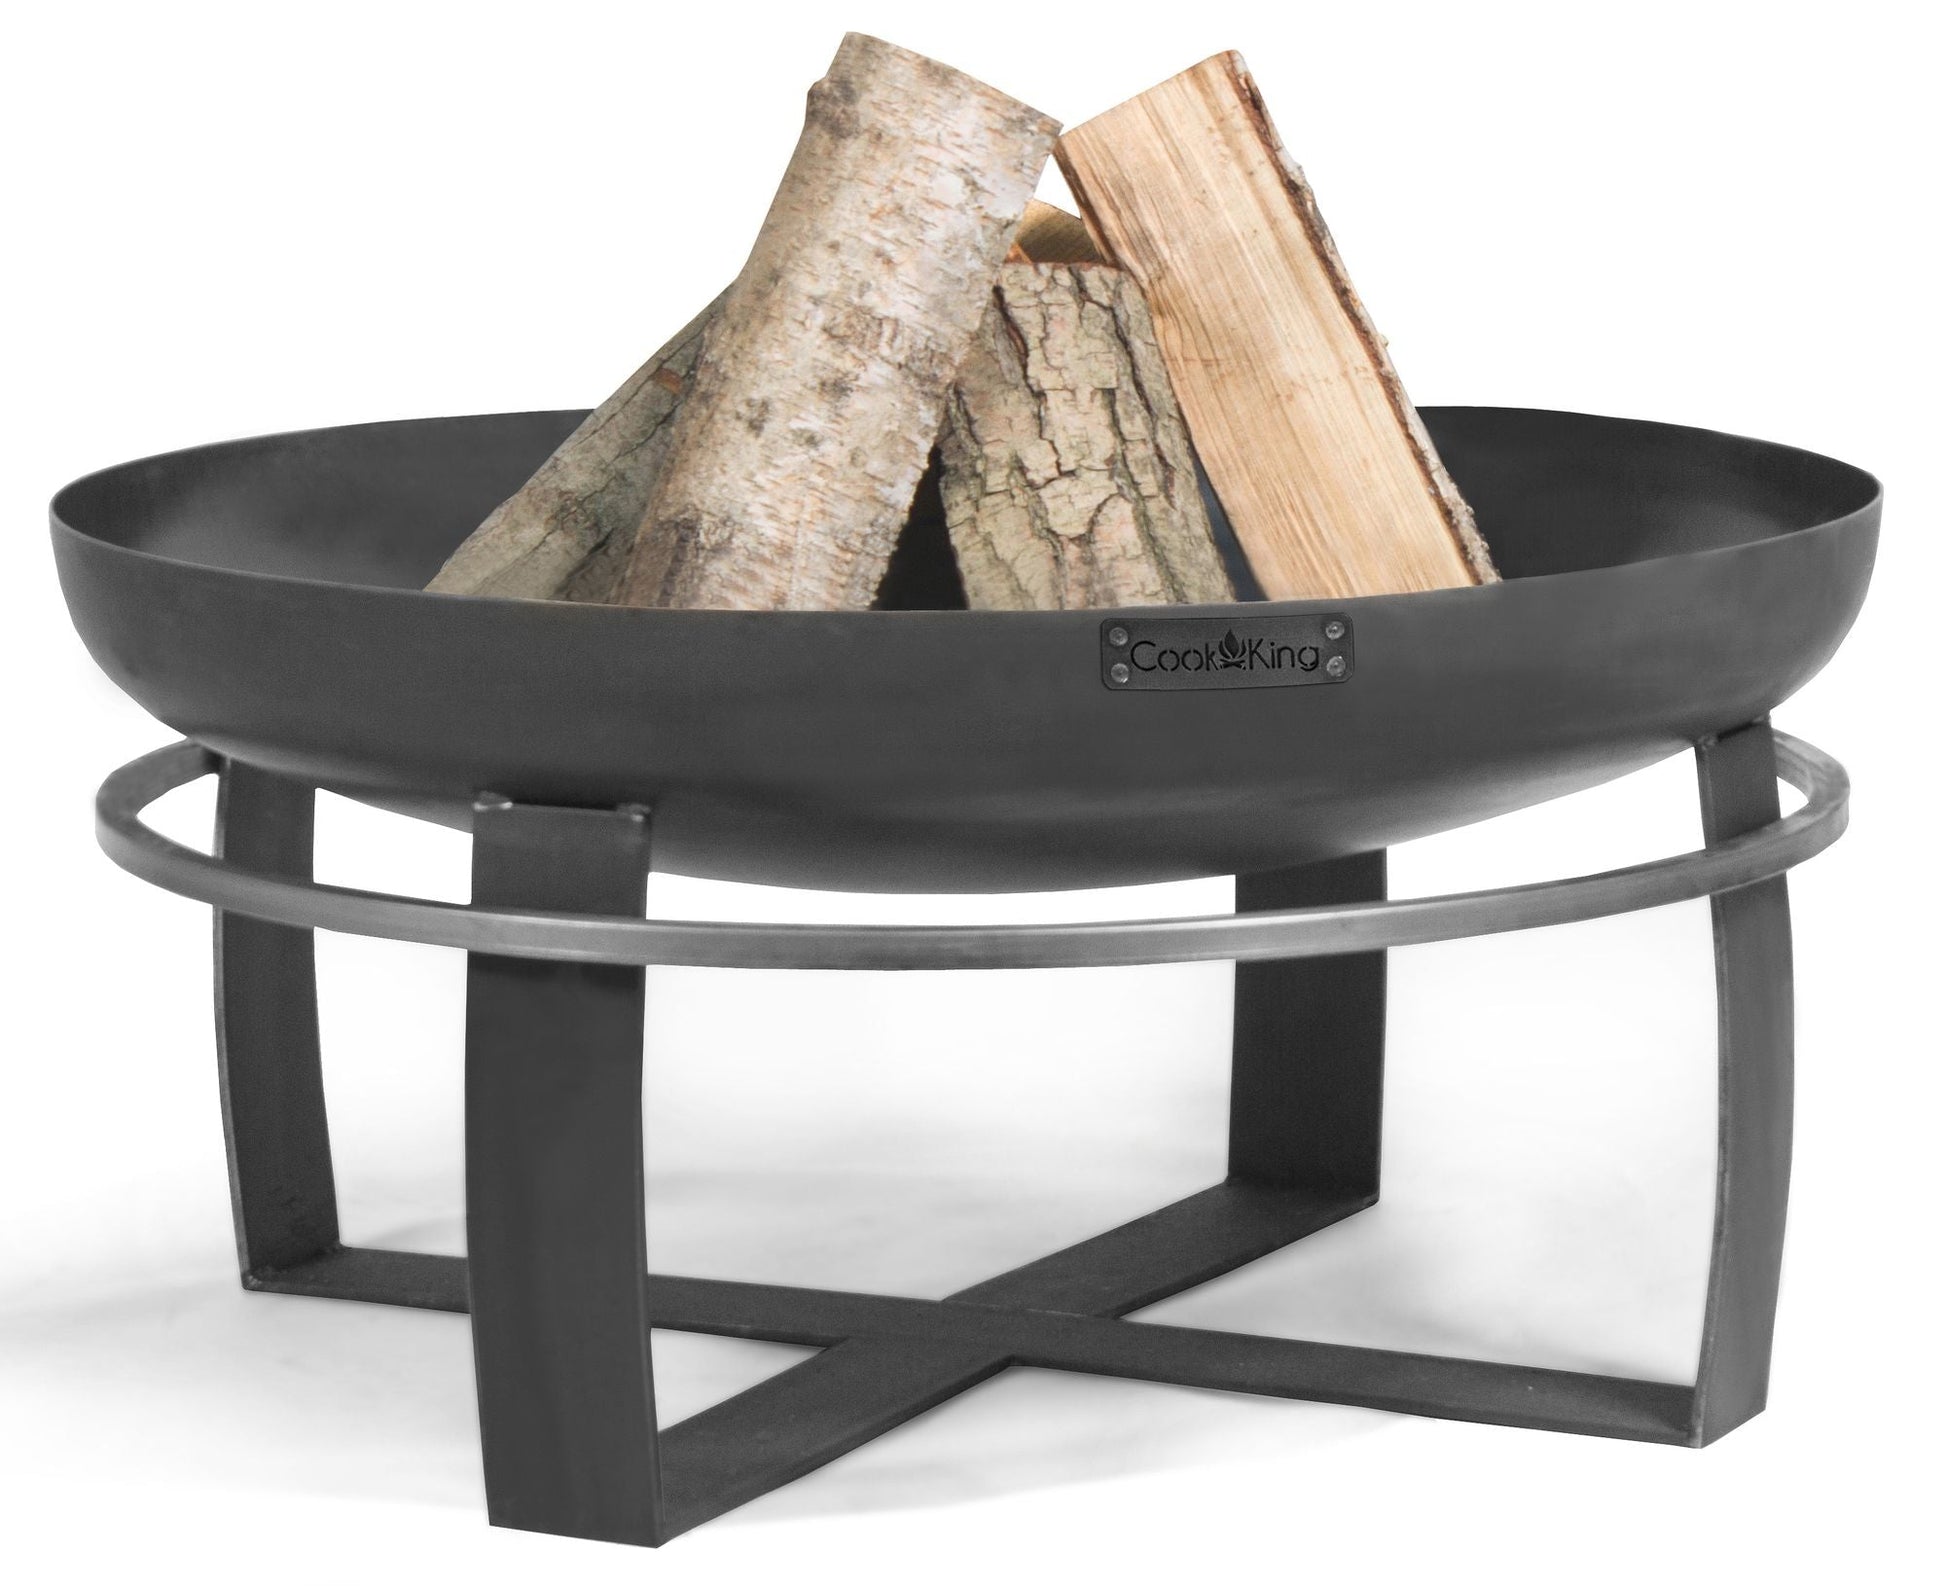 Cook King Viking Fire Pit - Good Directions